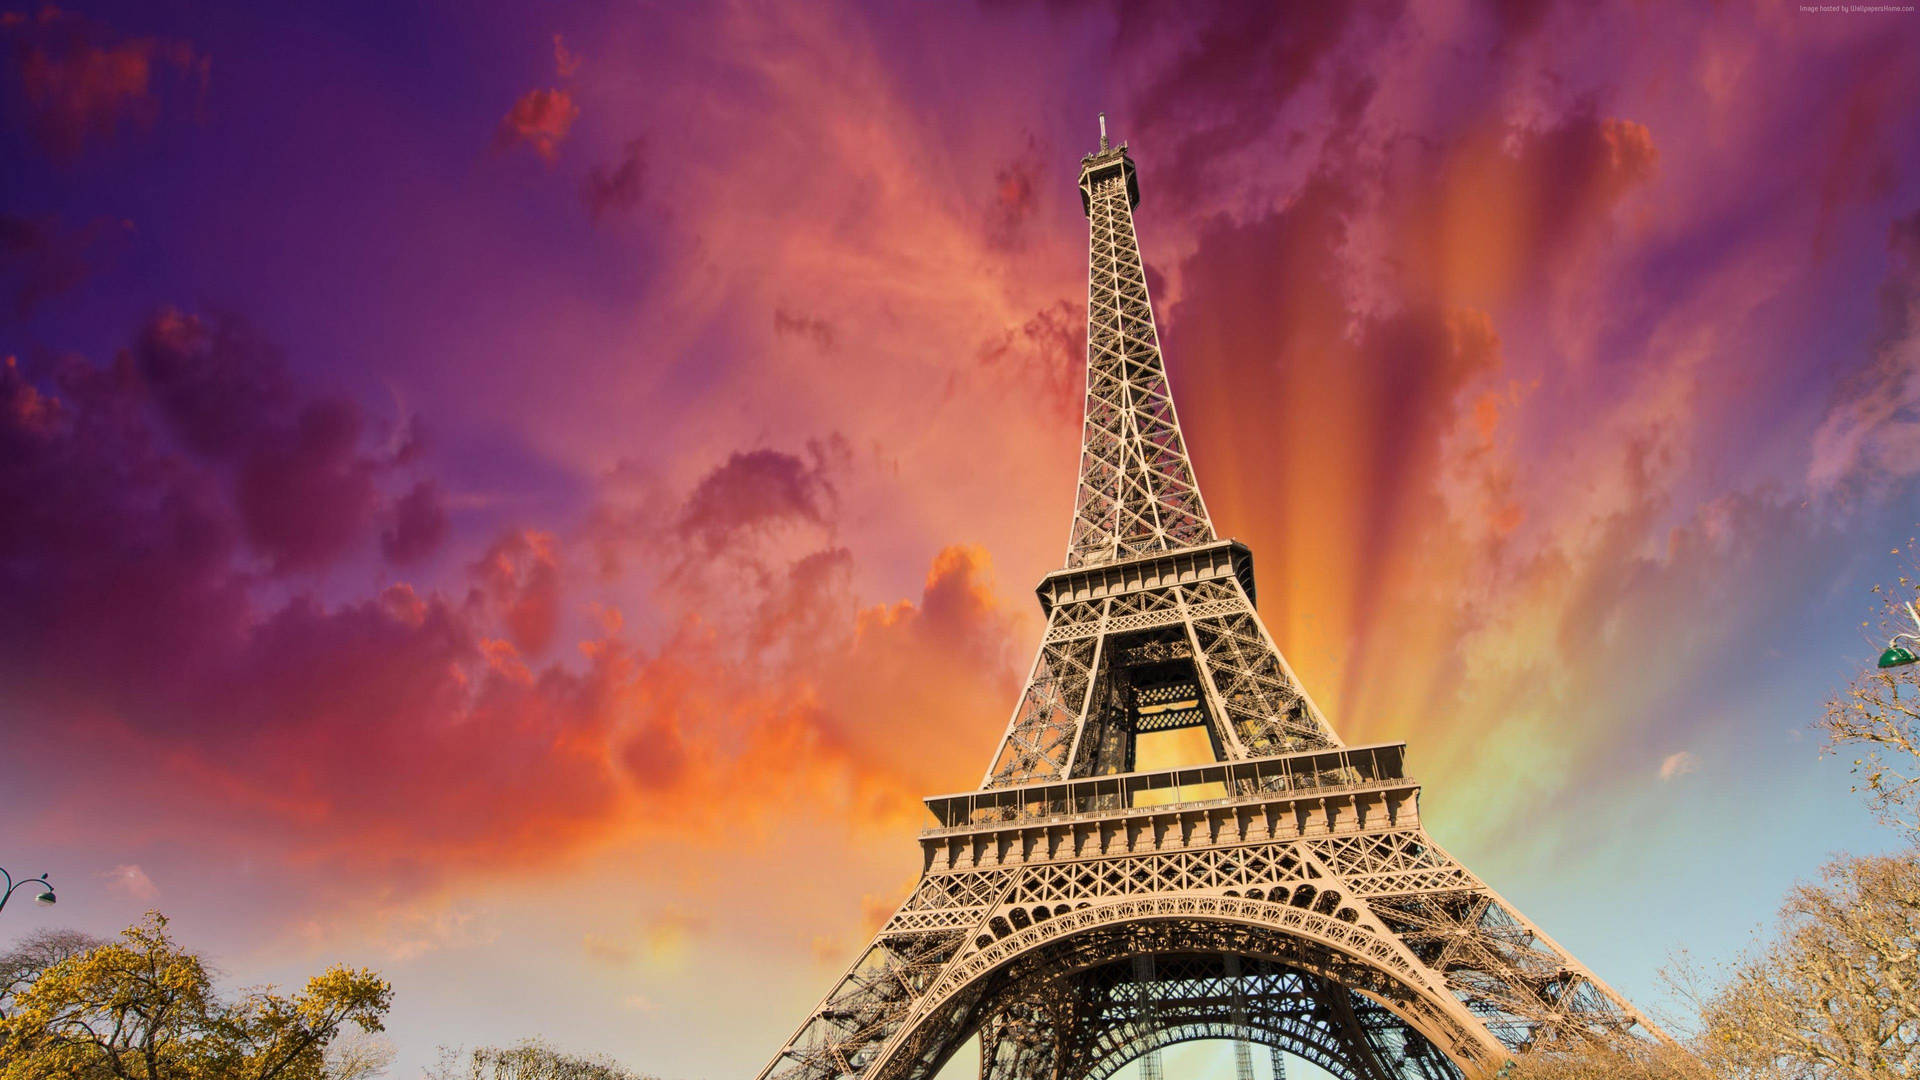 Download Eiffel Tower With Aesthetic Sun Rays Wallpaper | Wallpapers.com